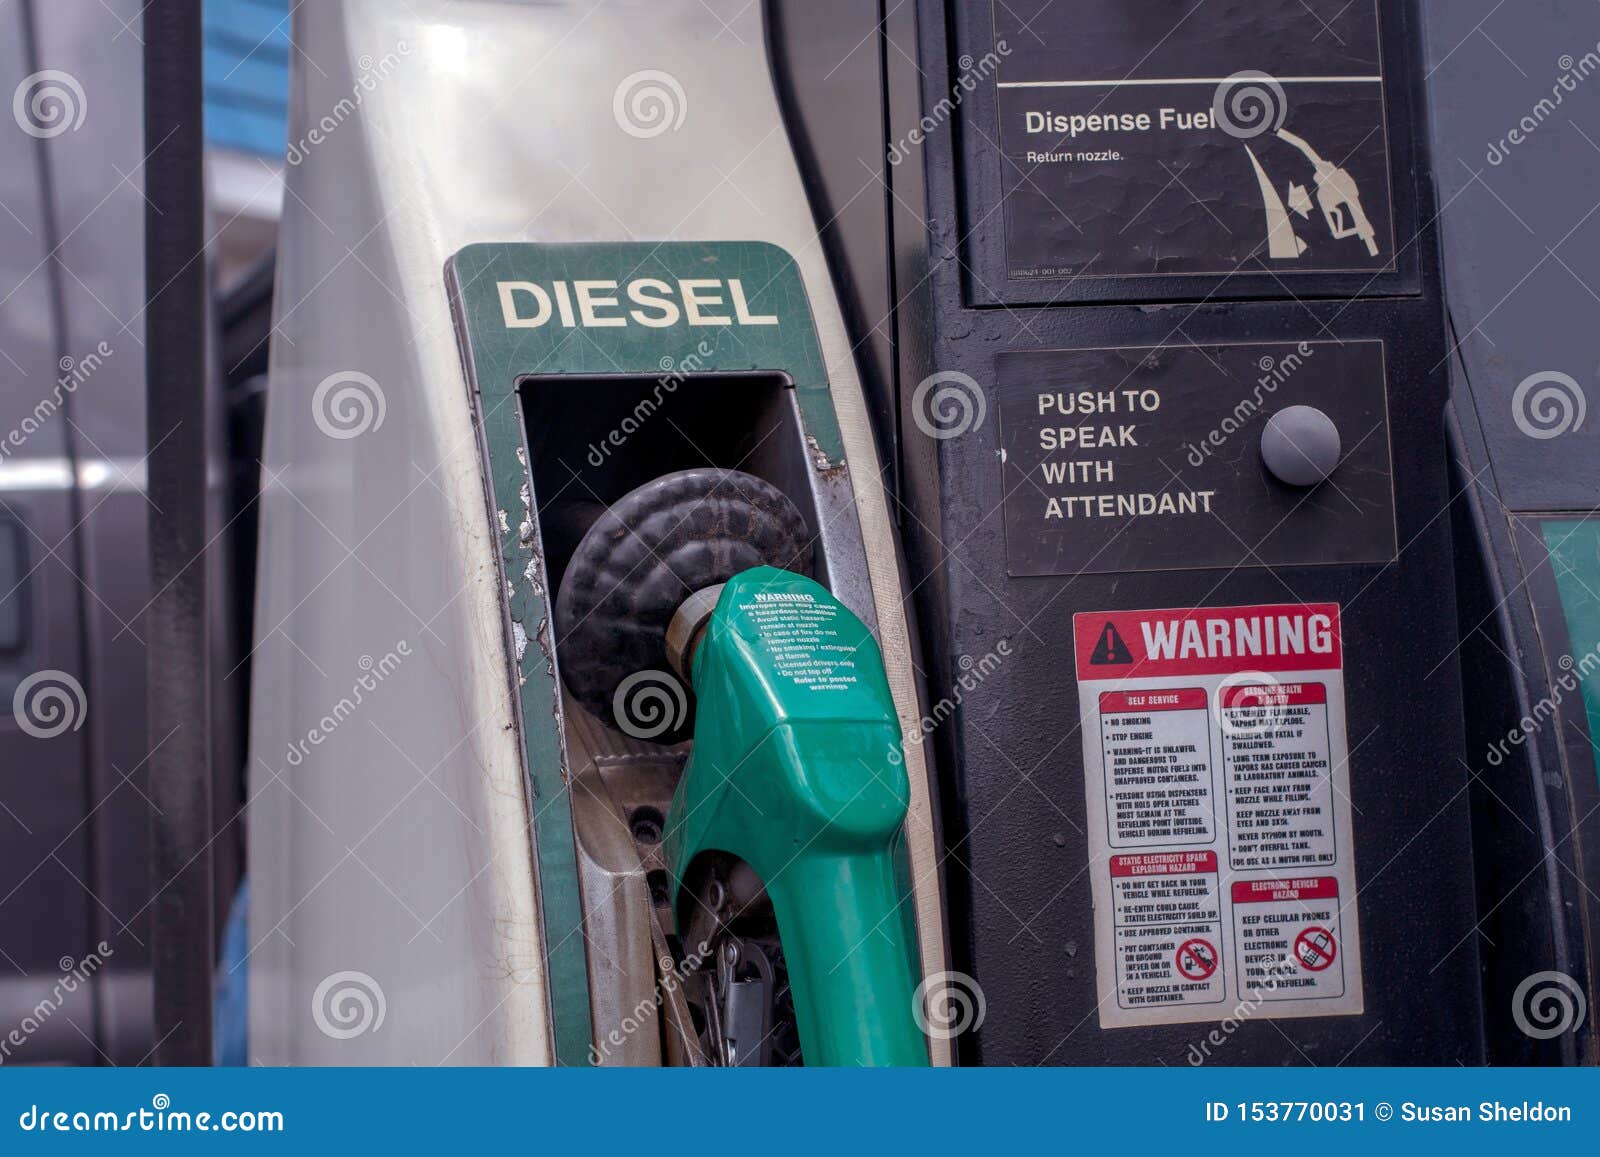 Buying Diesel Fuel At A Gas Station In The USA Stock Image